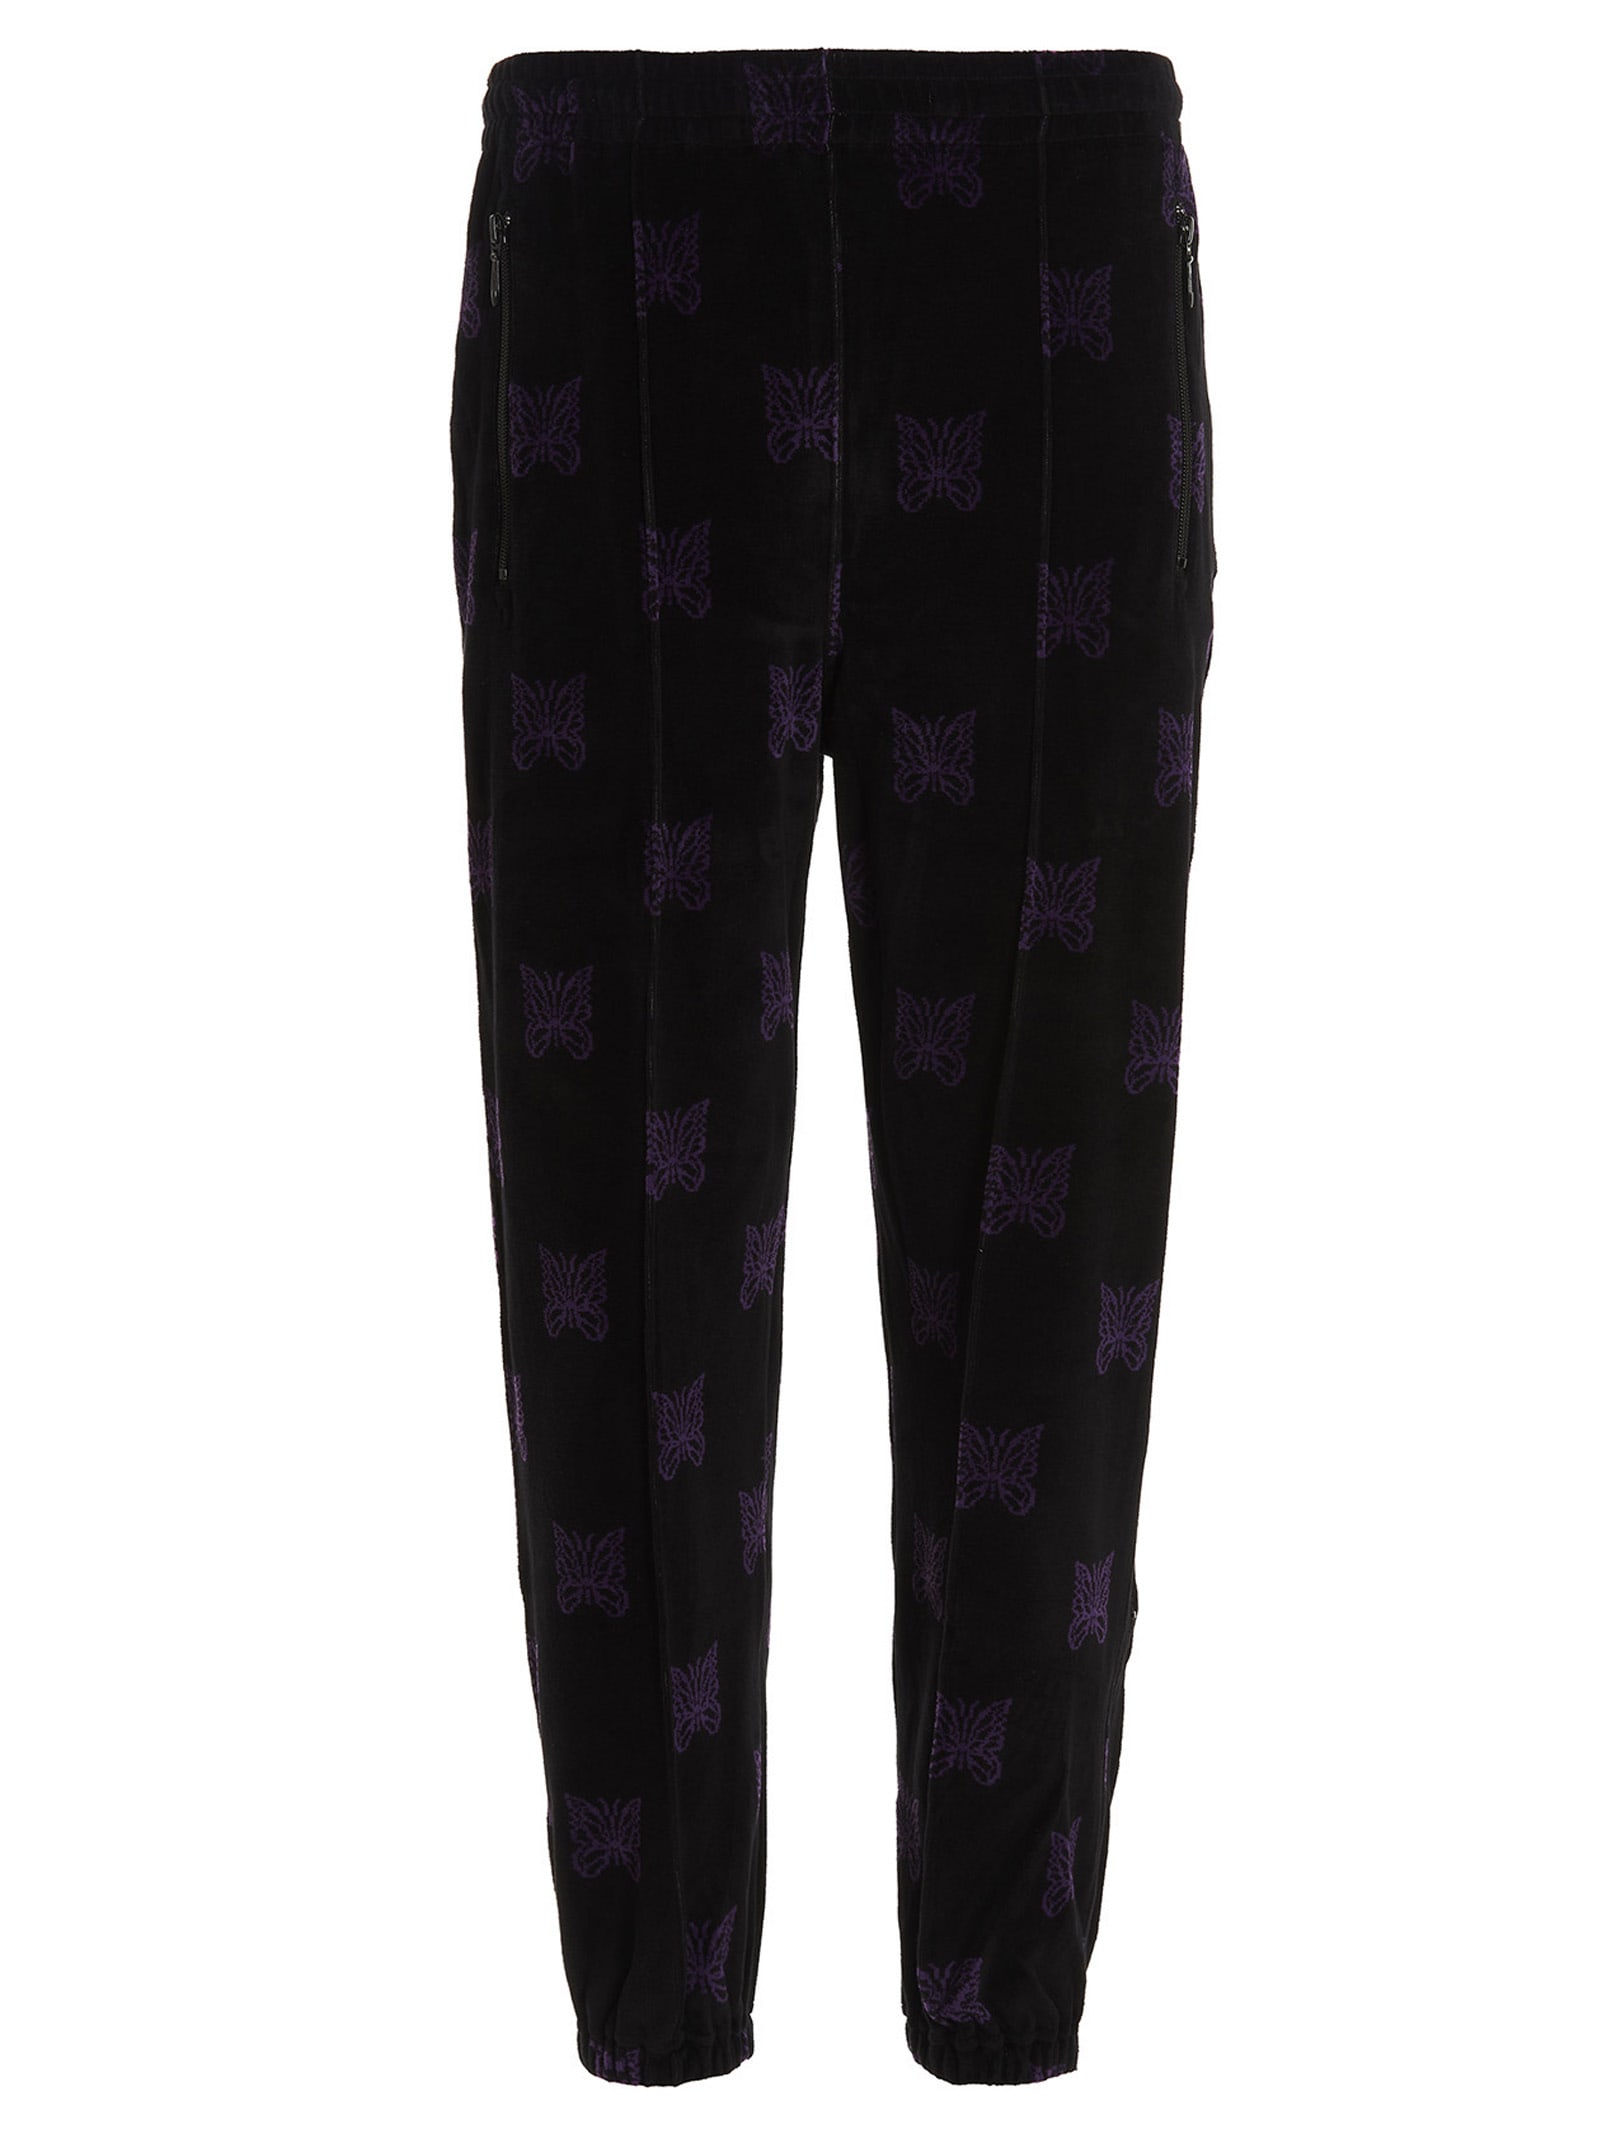 22AW Needles Zipped Track Pant D PURPLE その他 激安アウトレット